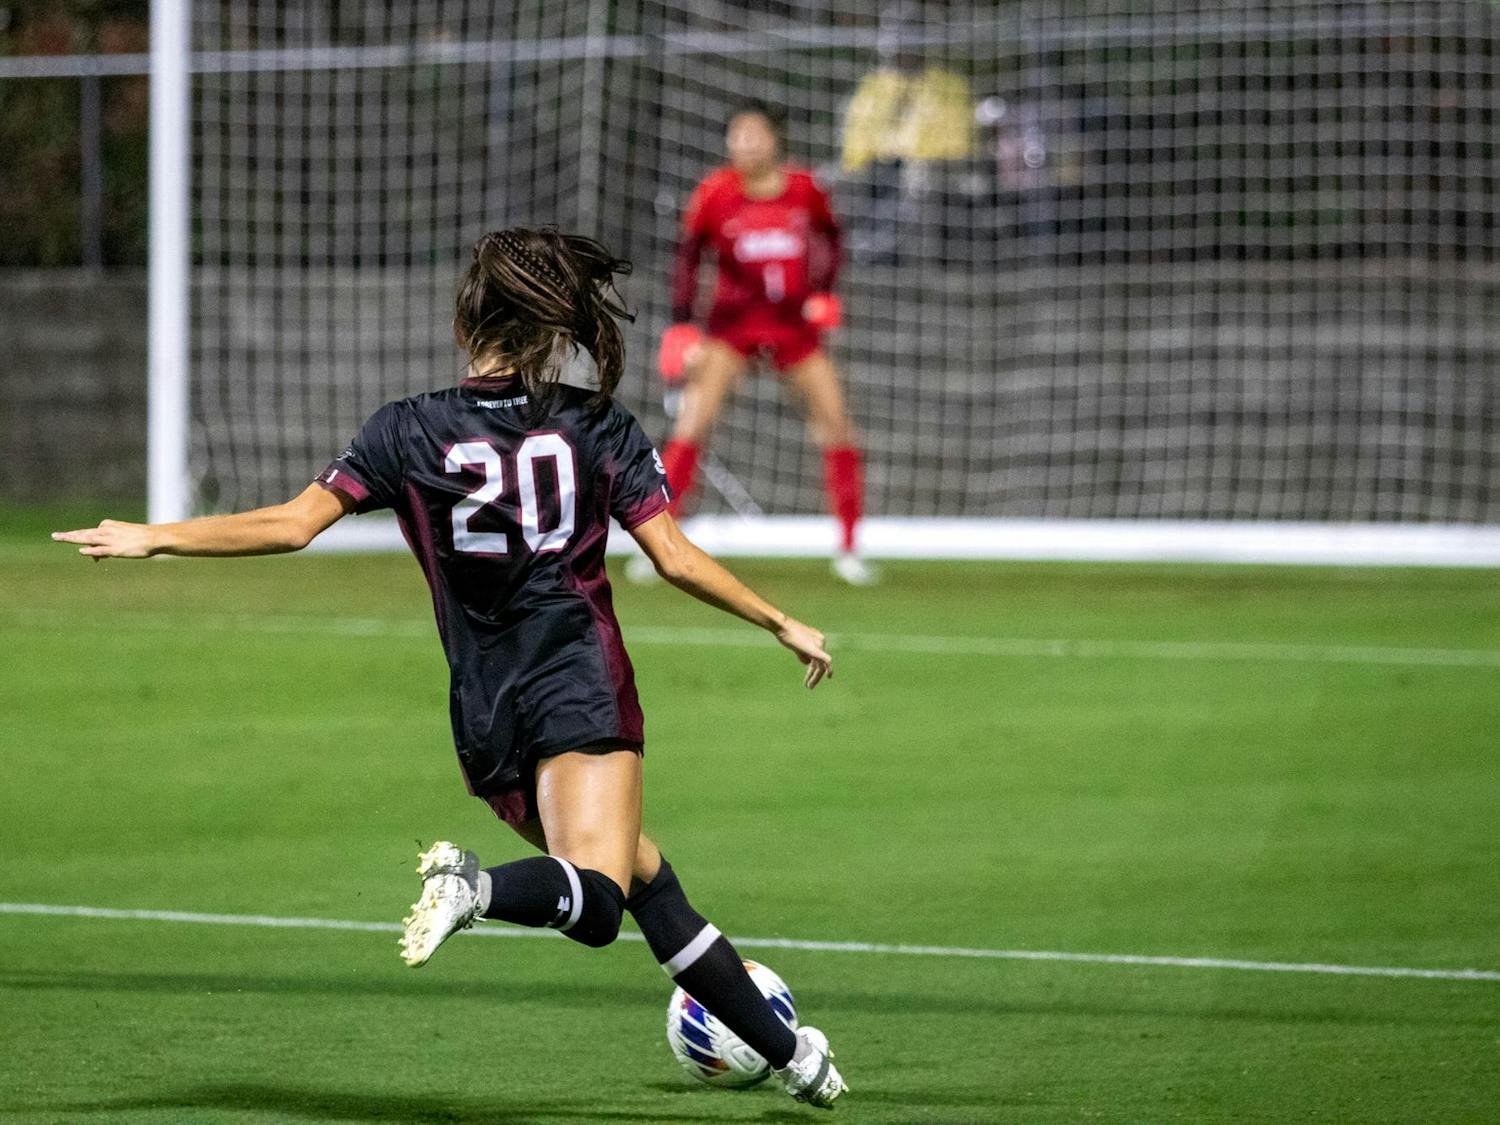 Senior forward Corinna Zullo dribbles the ball downfield in a game against Ole Miss at Stone Stadium on Oct. 13, 2023. The Gamecocks drew 0-0 to the Rebels.